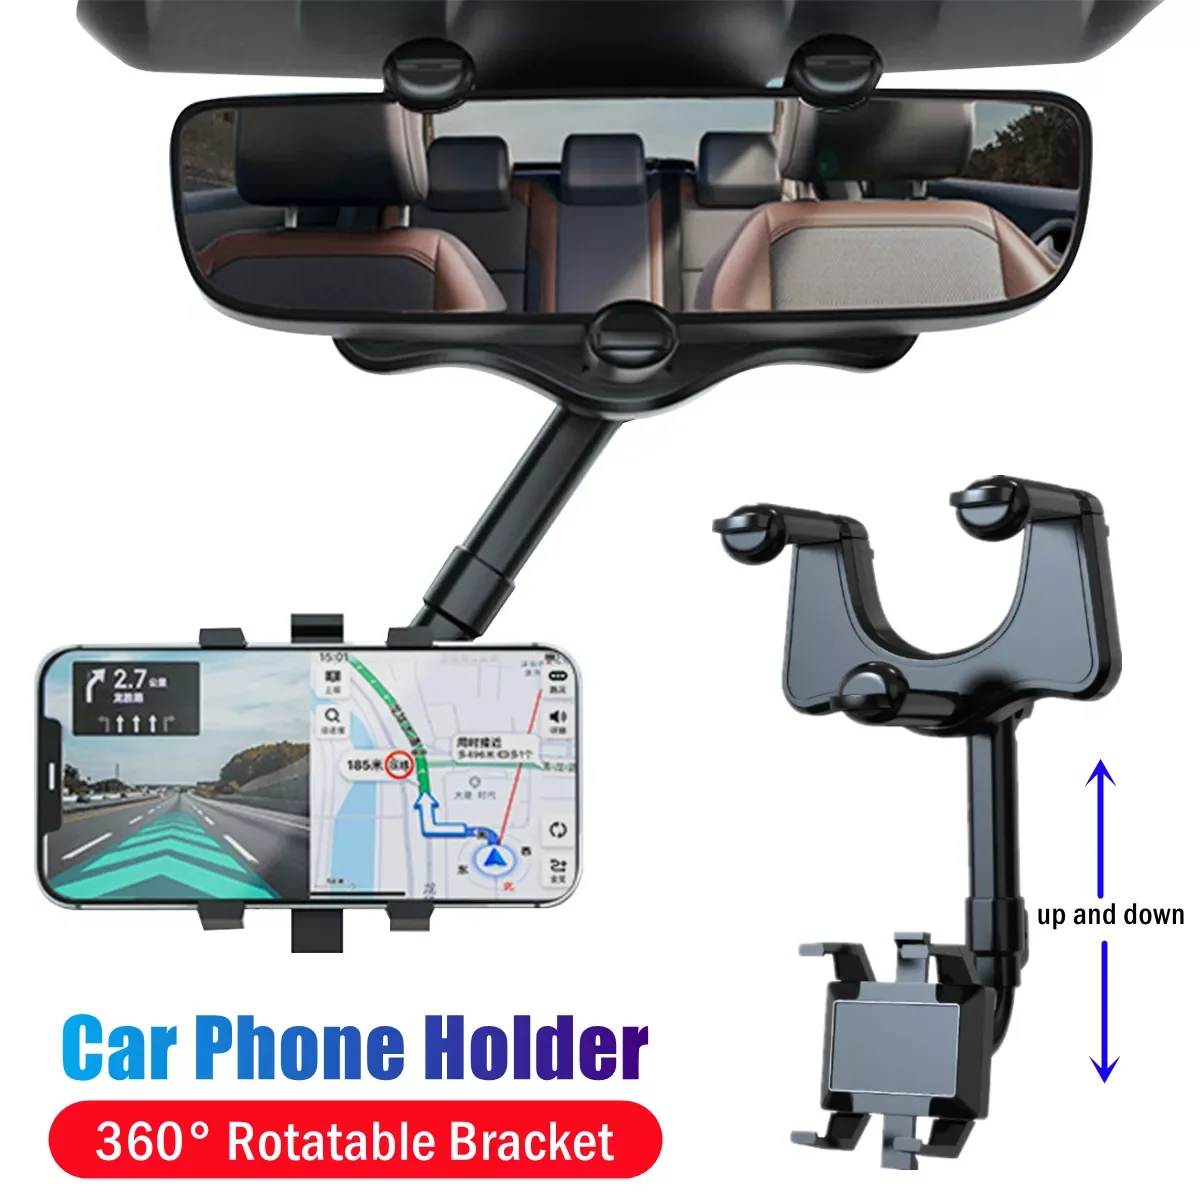 

Upgrade 360° Rotate Rearview Mirror Phone Holder in Car Mount Phone GPS Holder Universal Adjustable Telescopic Car Phone Holder